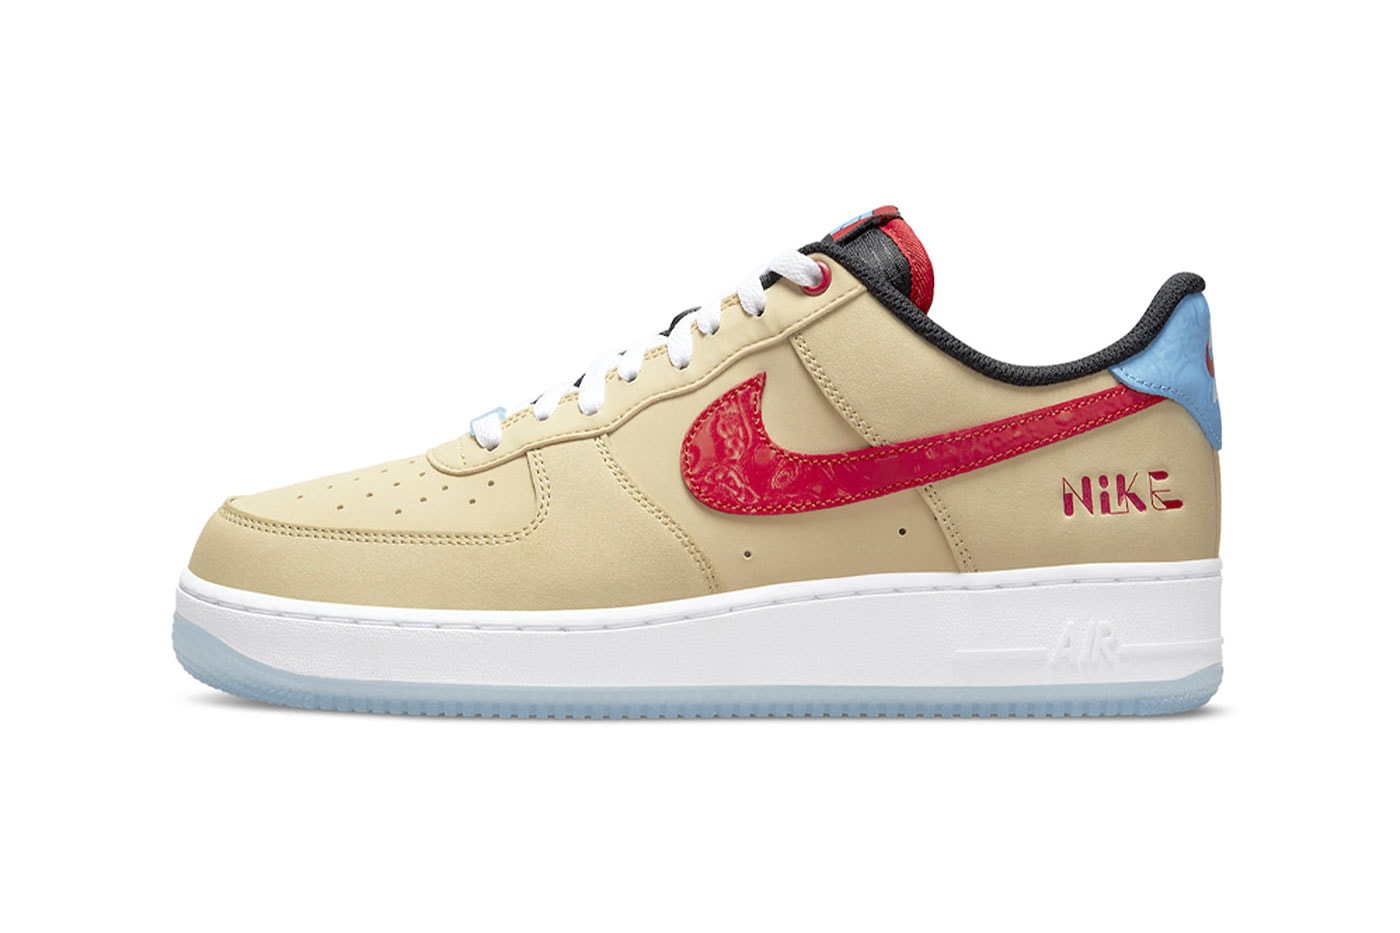 Nike Air Force 1 Low cream red blue black white translucent sole release info news dq7628-200